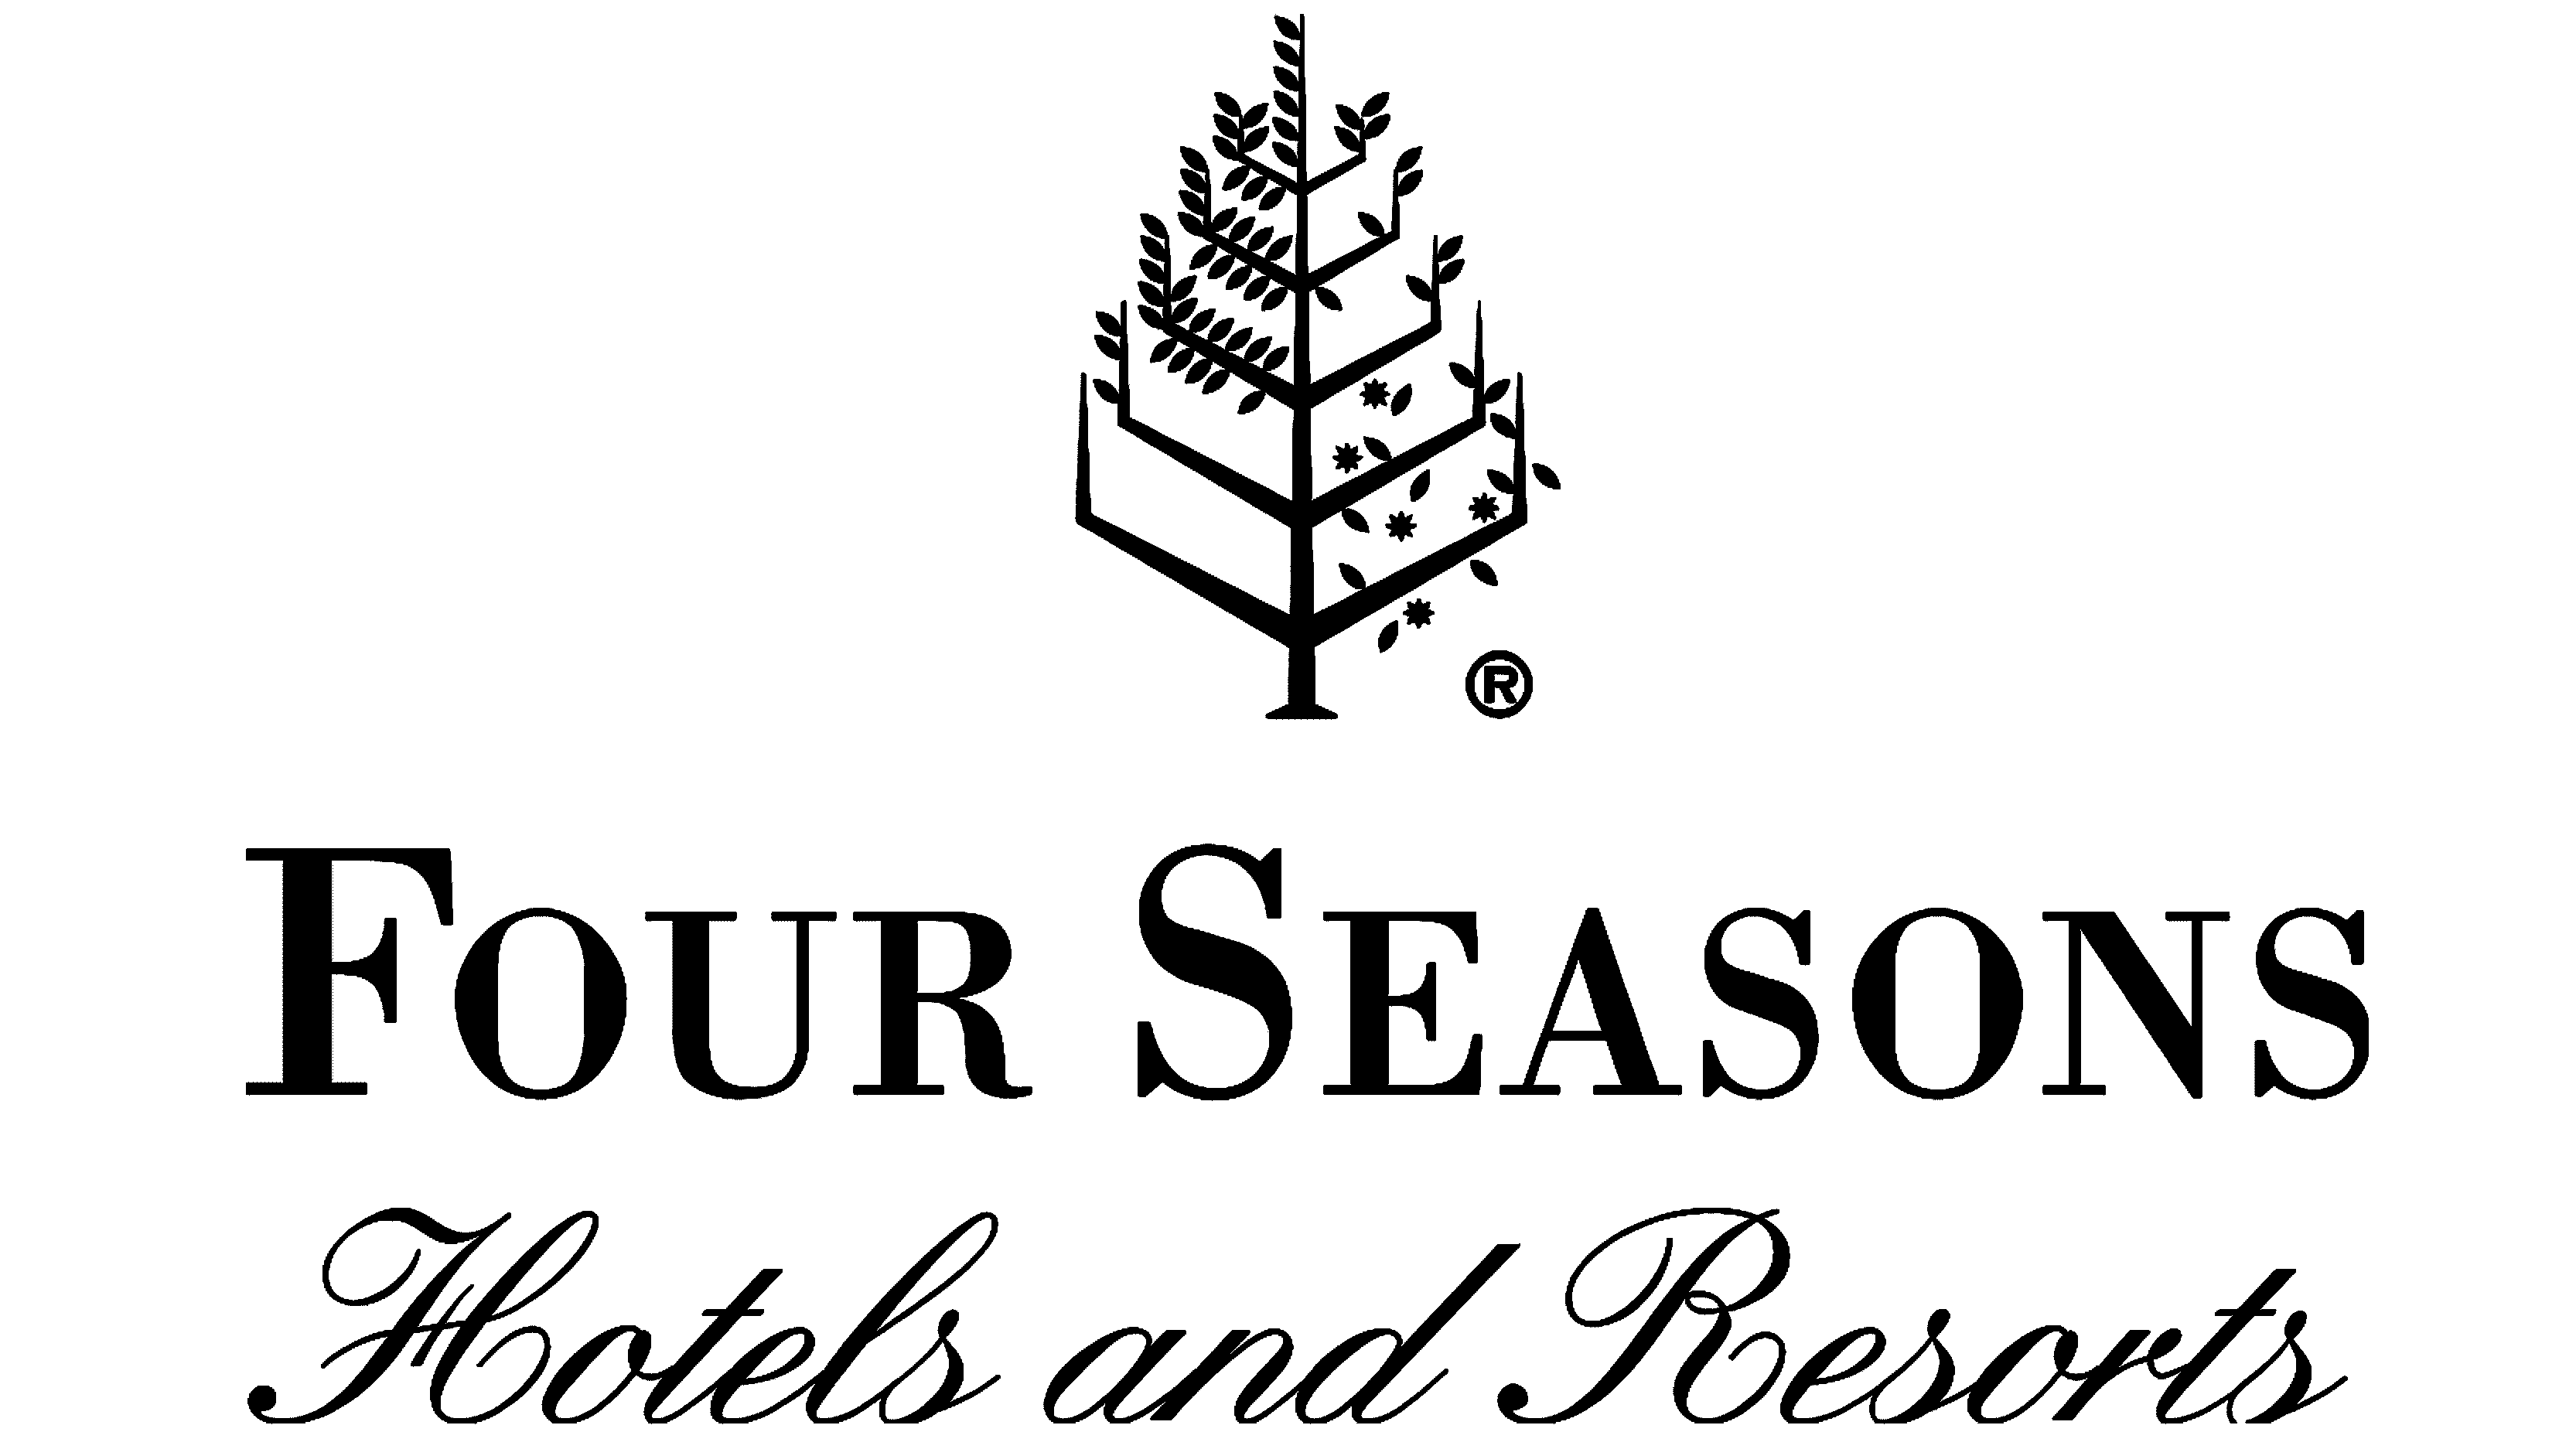 Front Office Night Auditor Job at Four Seasons